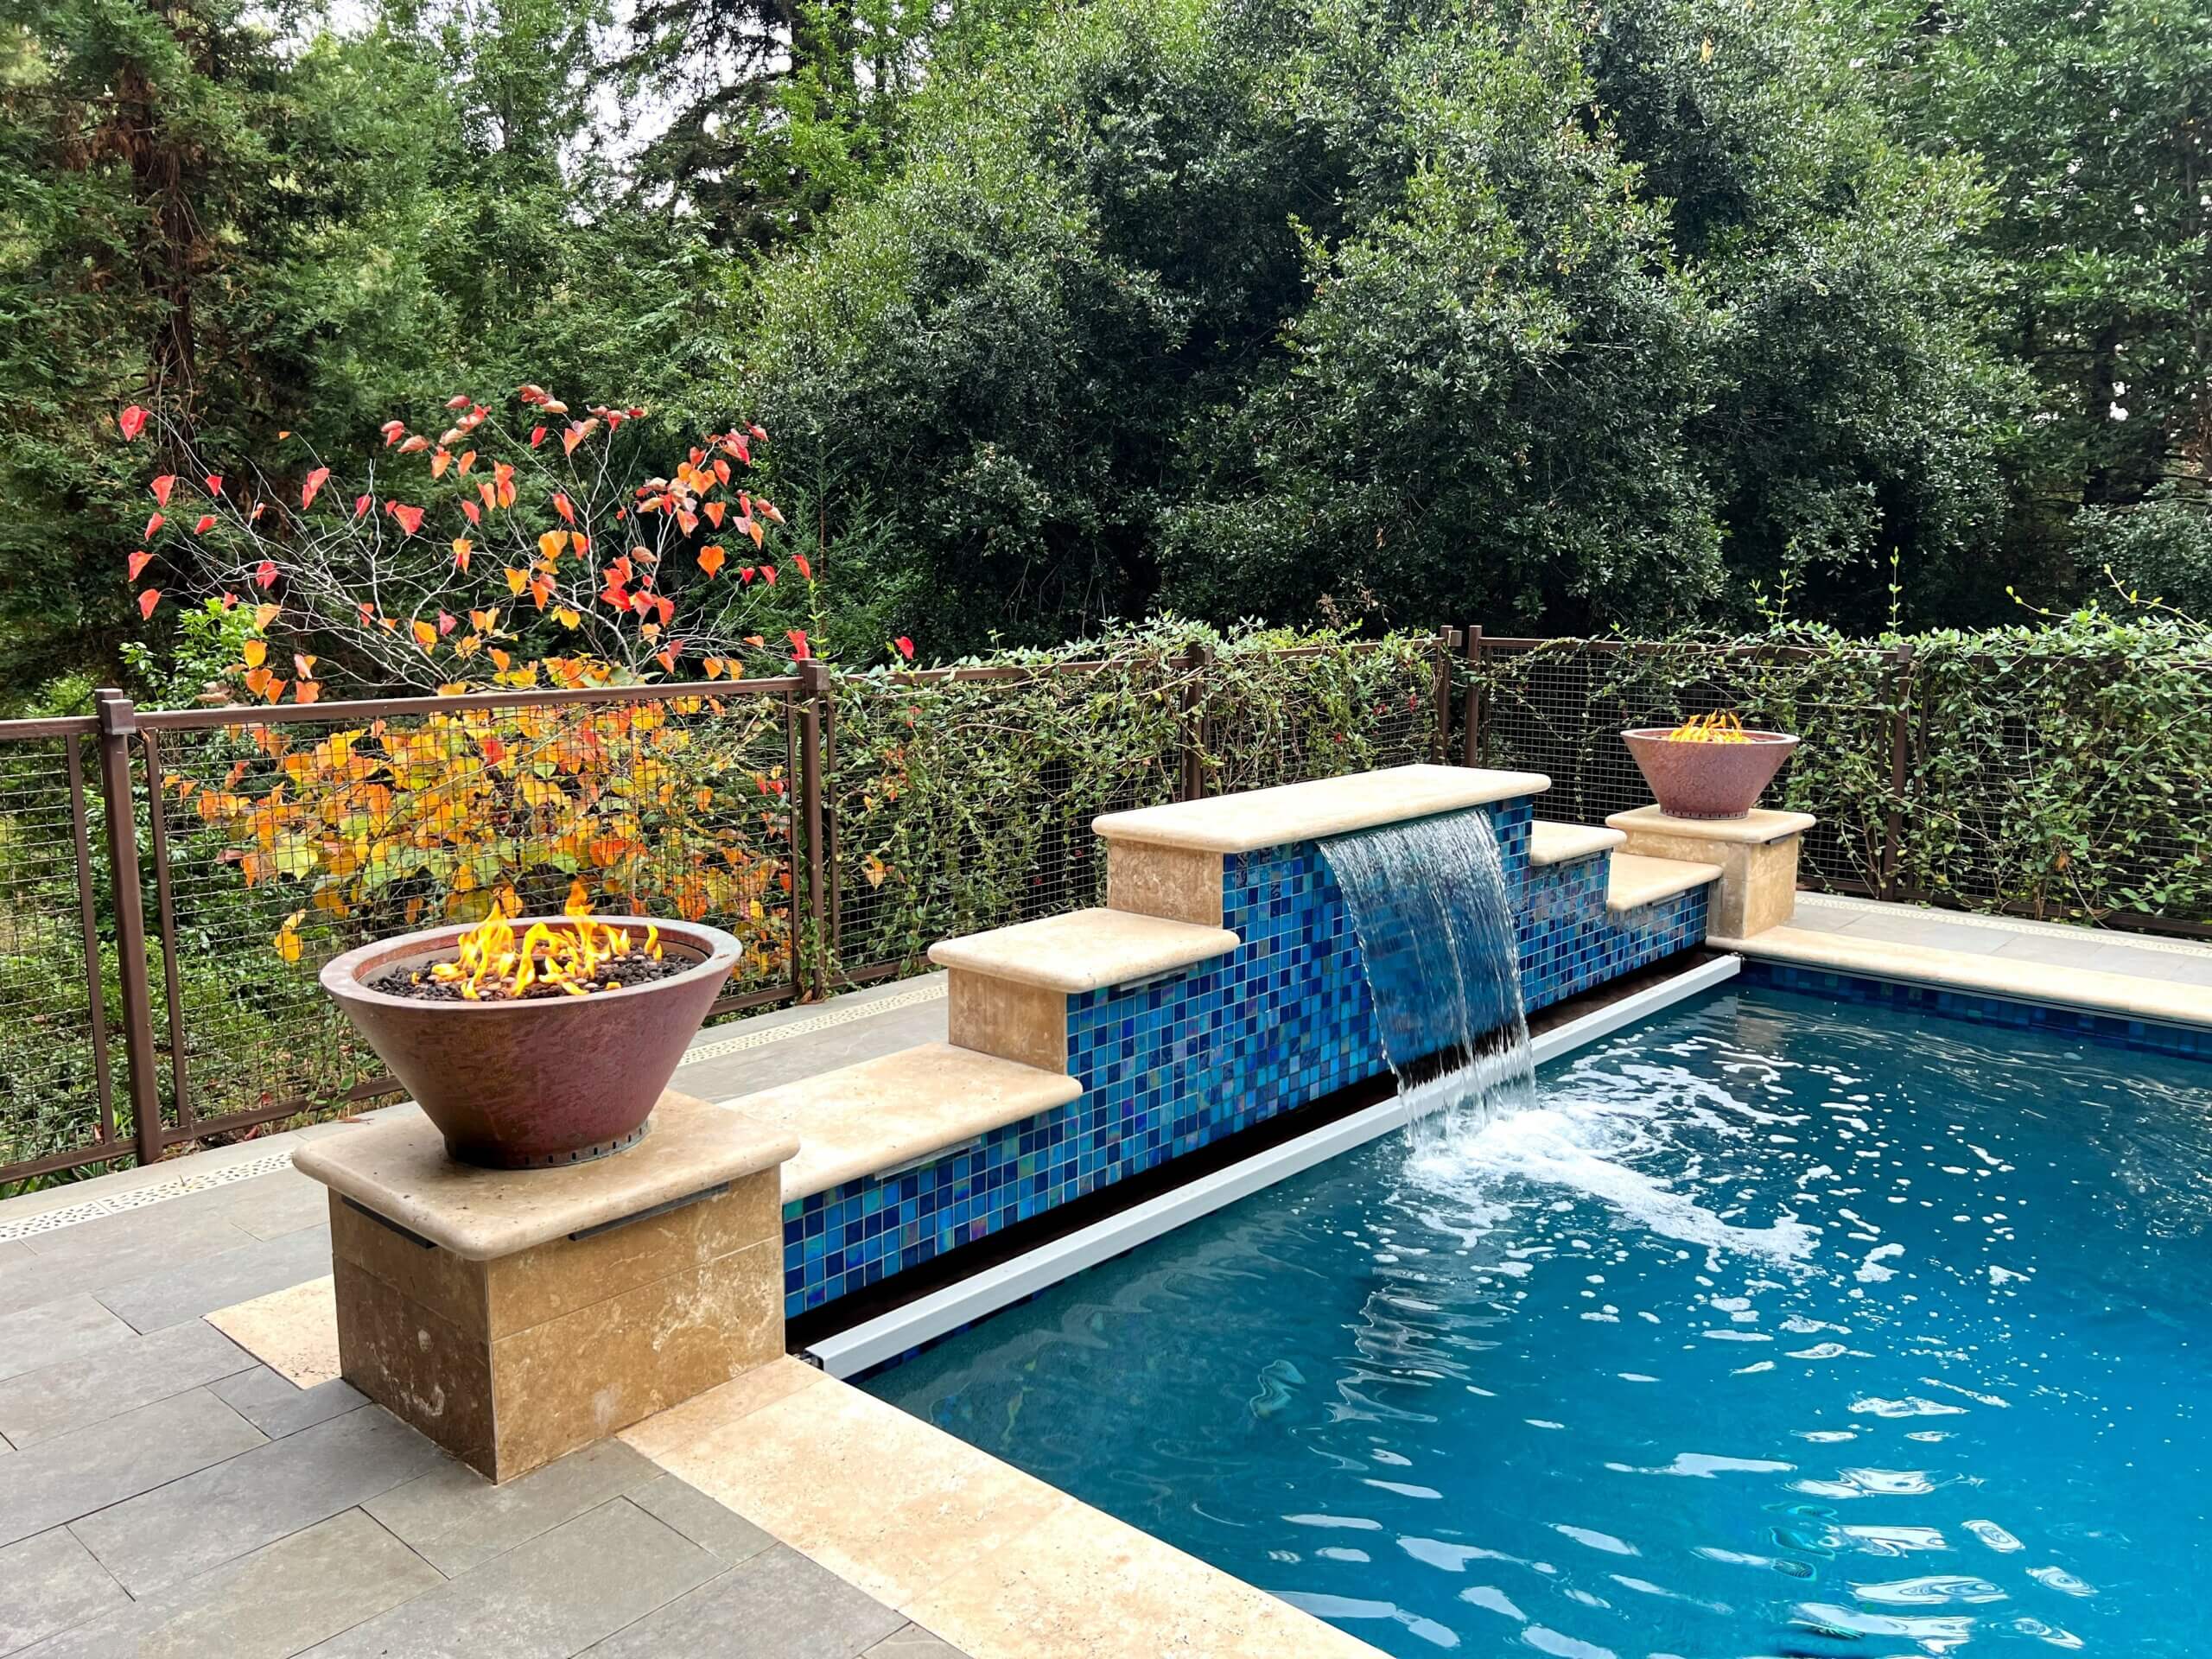 Swimming pool waterfall feature flanked by lit firepits